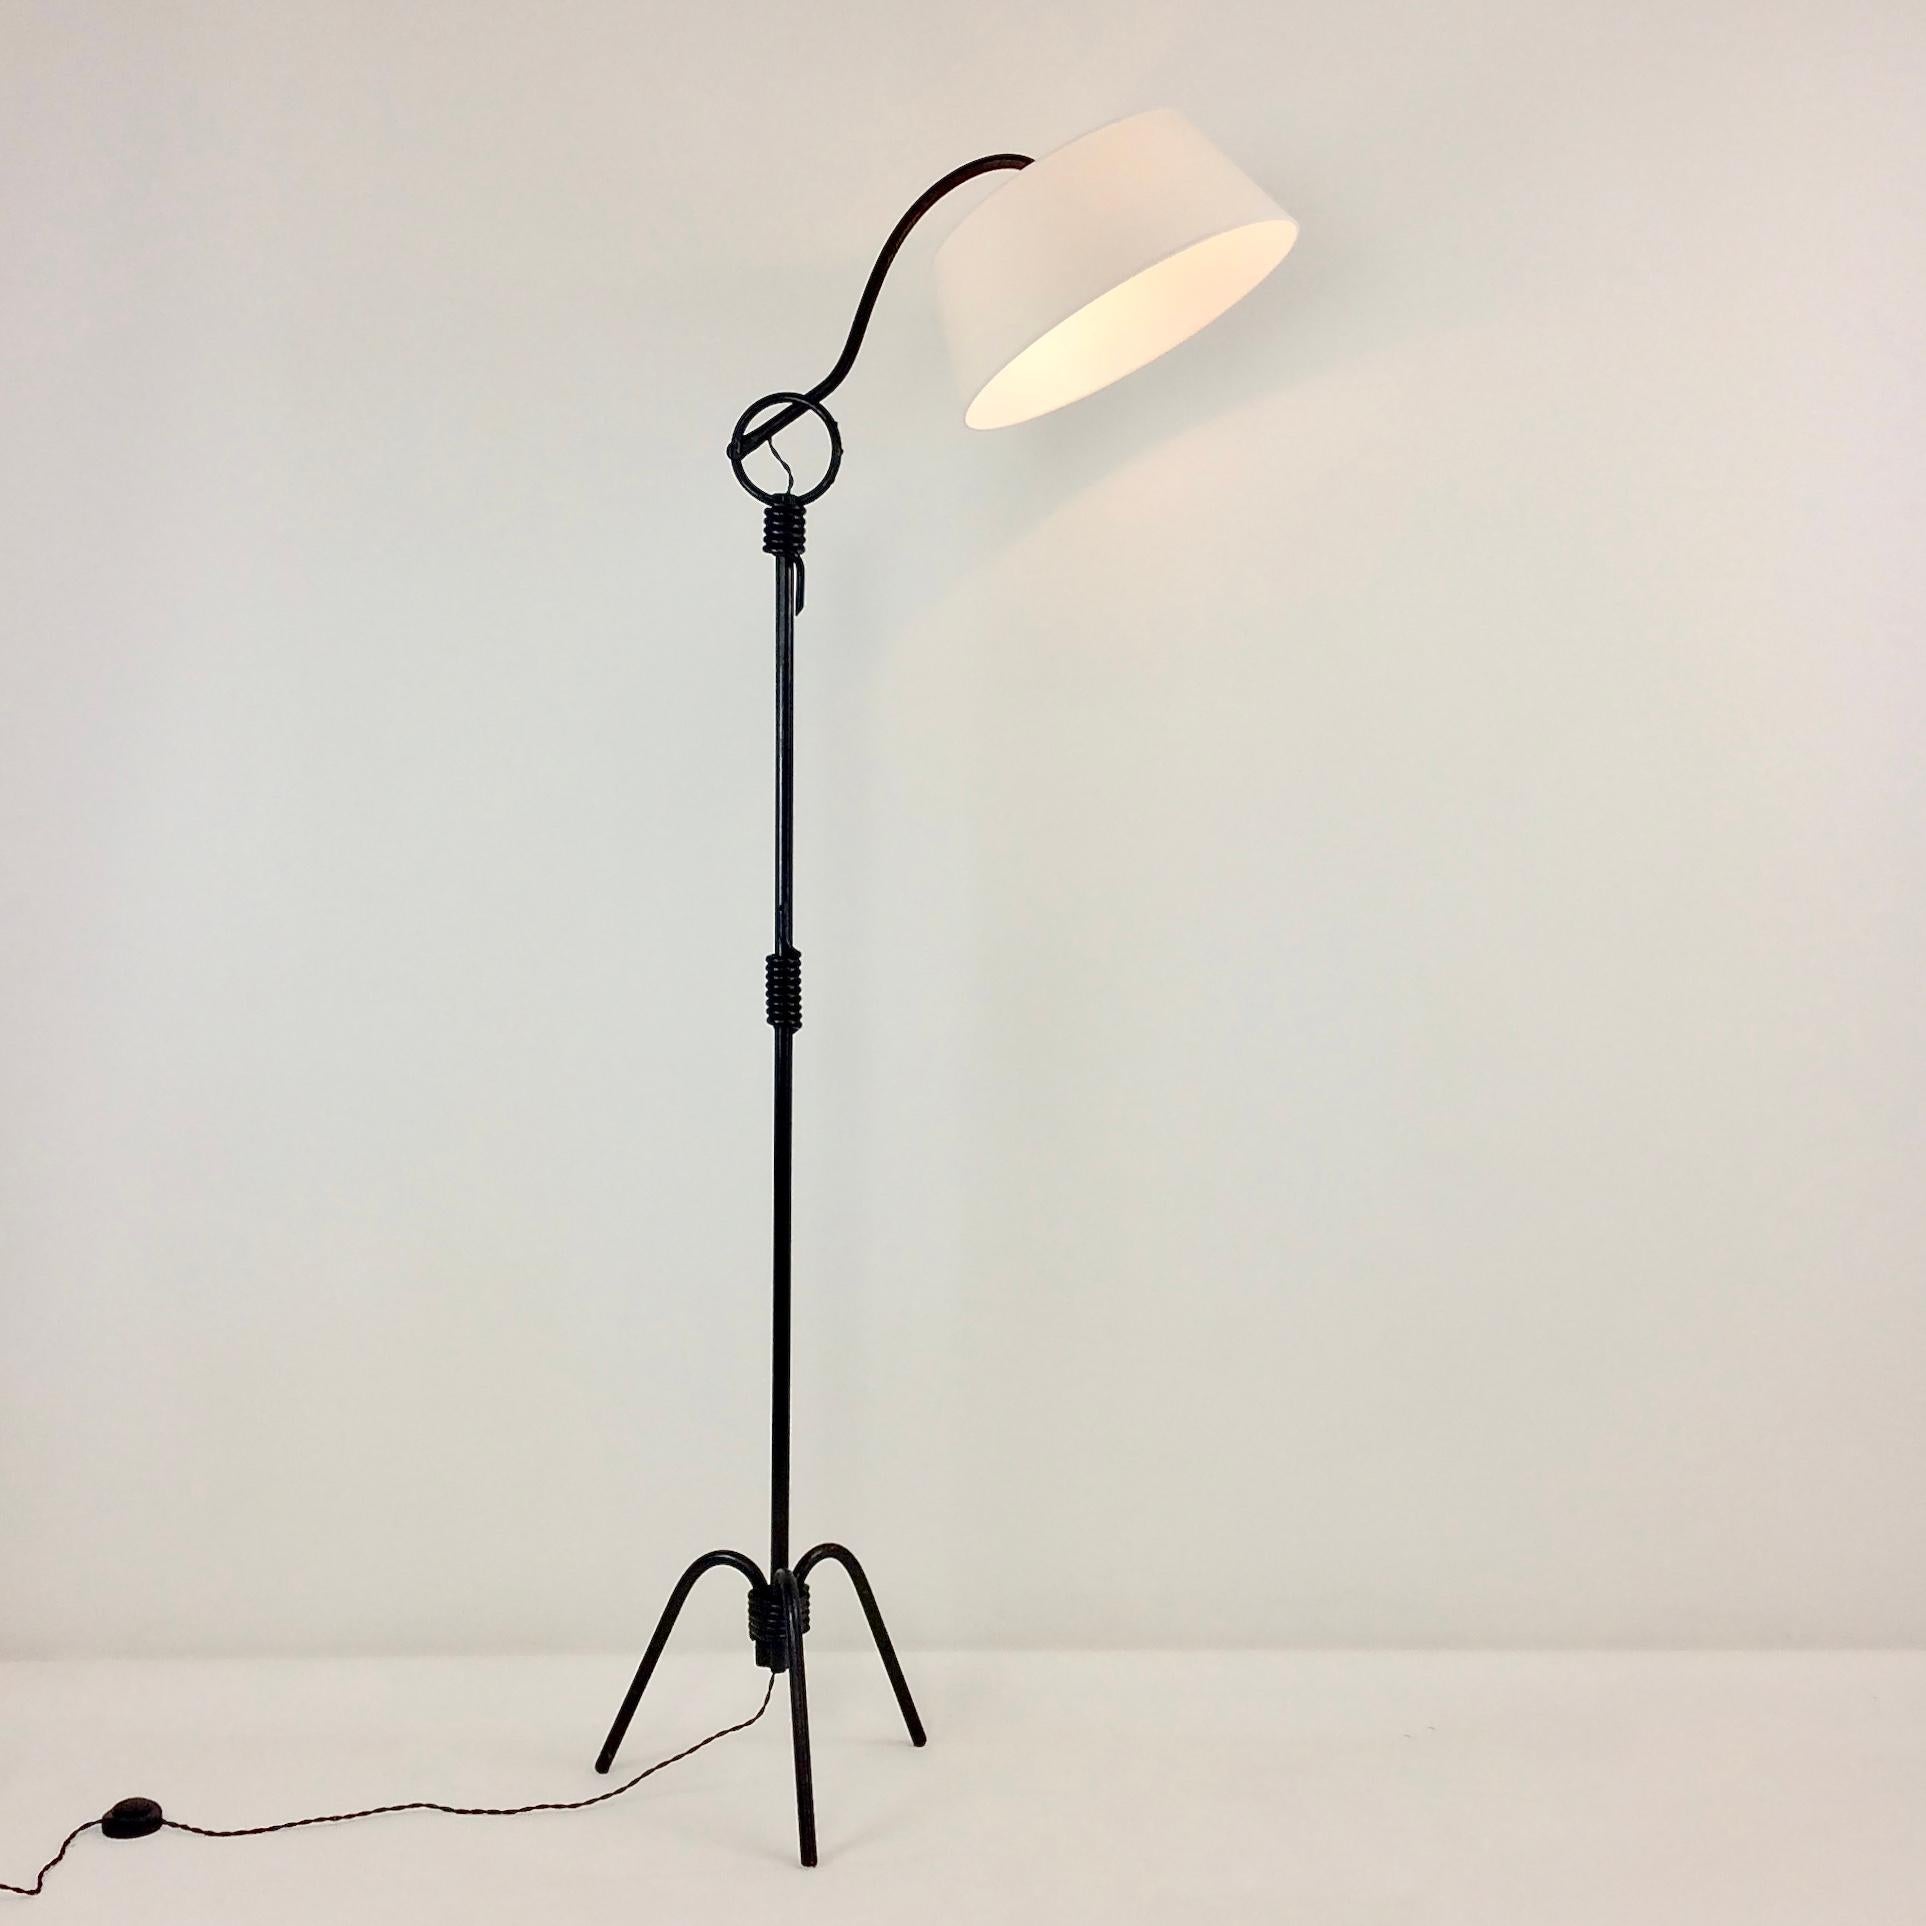 Mid-Century Modern Mid-Century Attributed Jacques Adnet Floor Lamp, circa 1950, France.